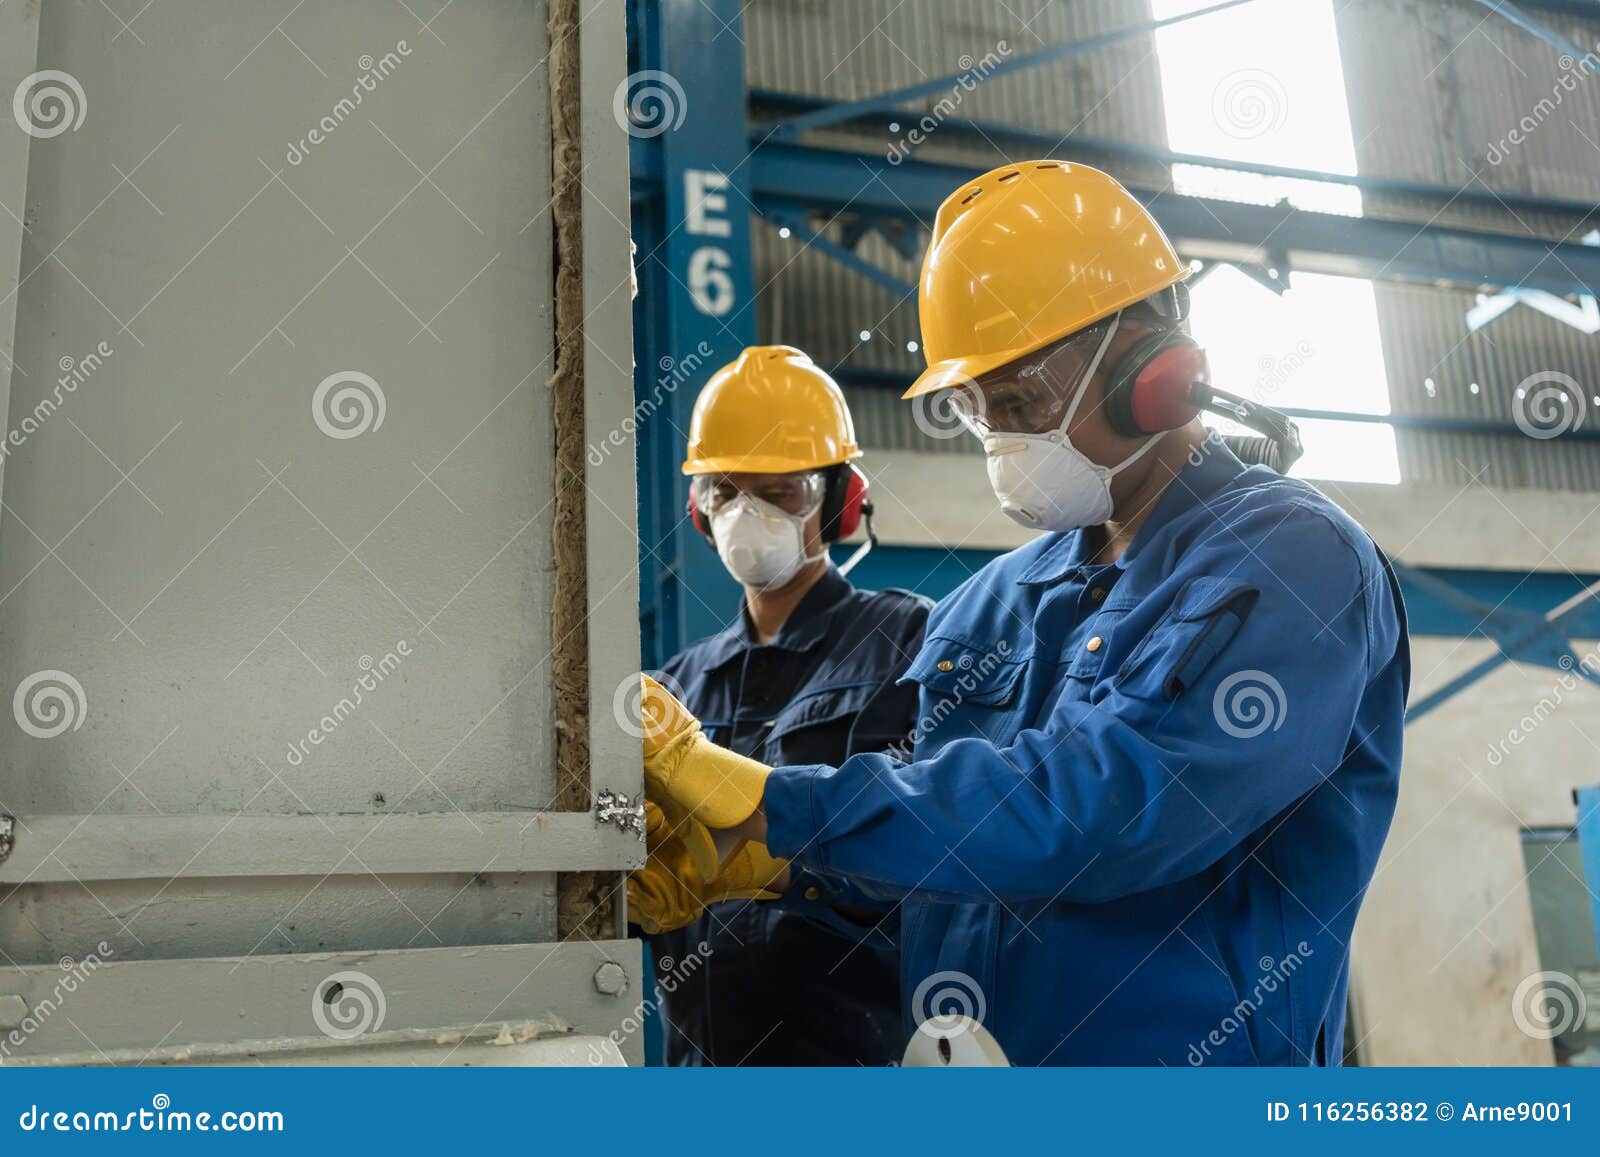 two blue-collar workers wearing protective equipment